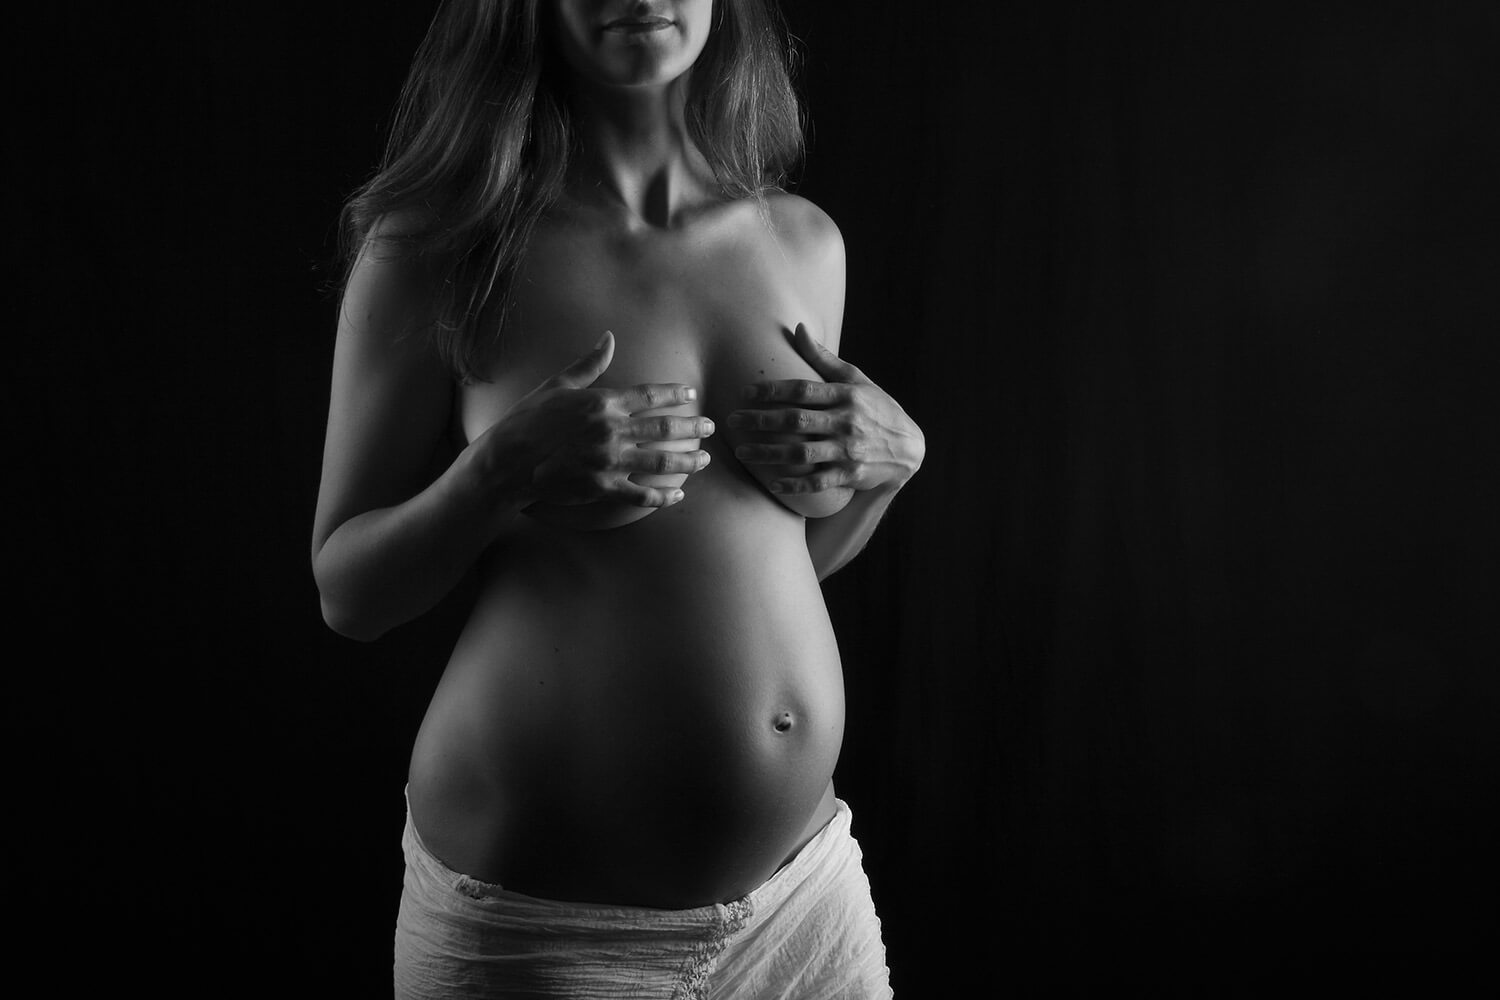 black and white maternity photo with a white skirt on a dark background